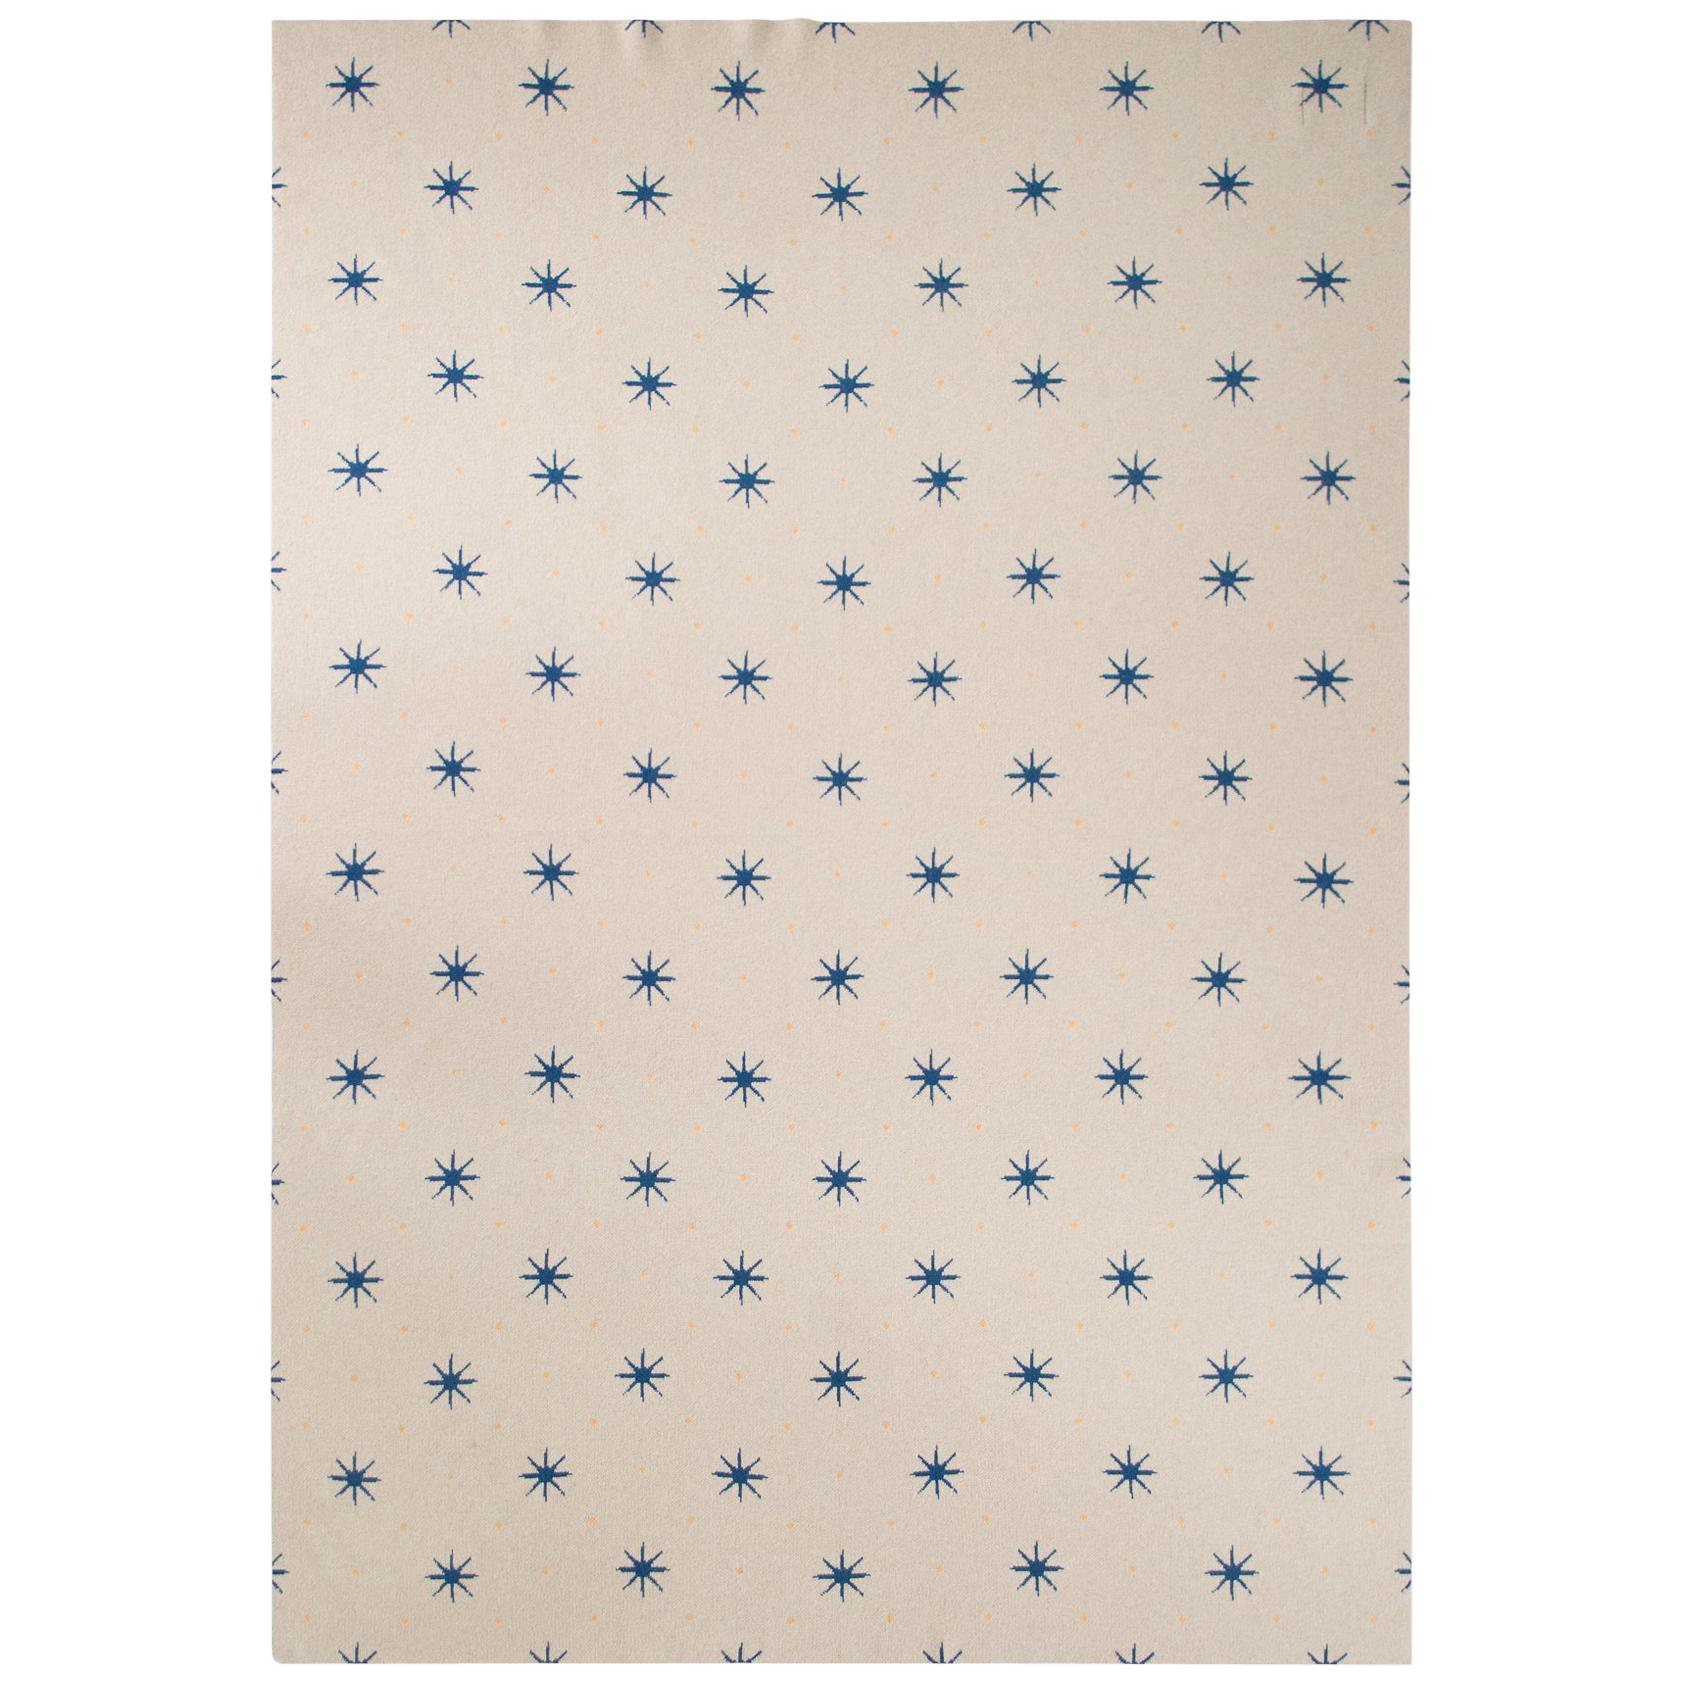 Blue Stars Cashmere Throw by Saved, New York